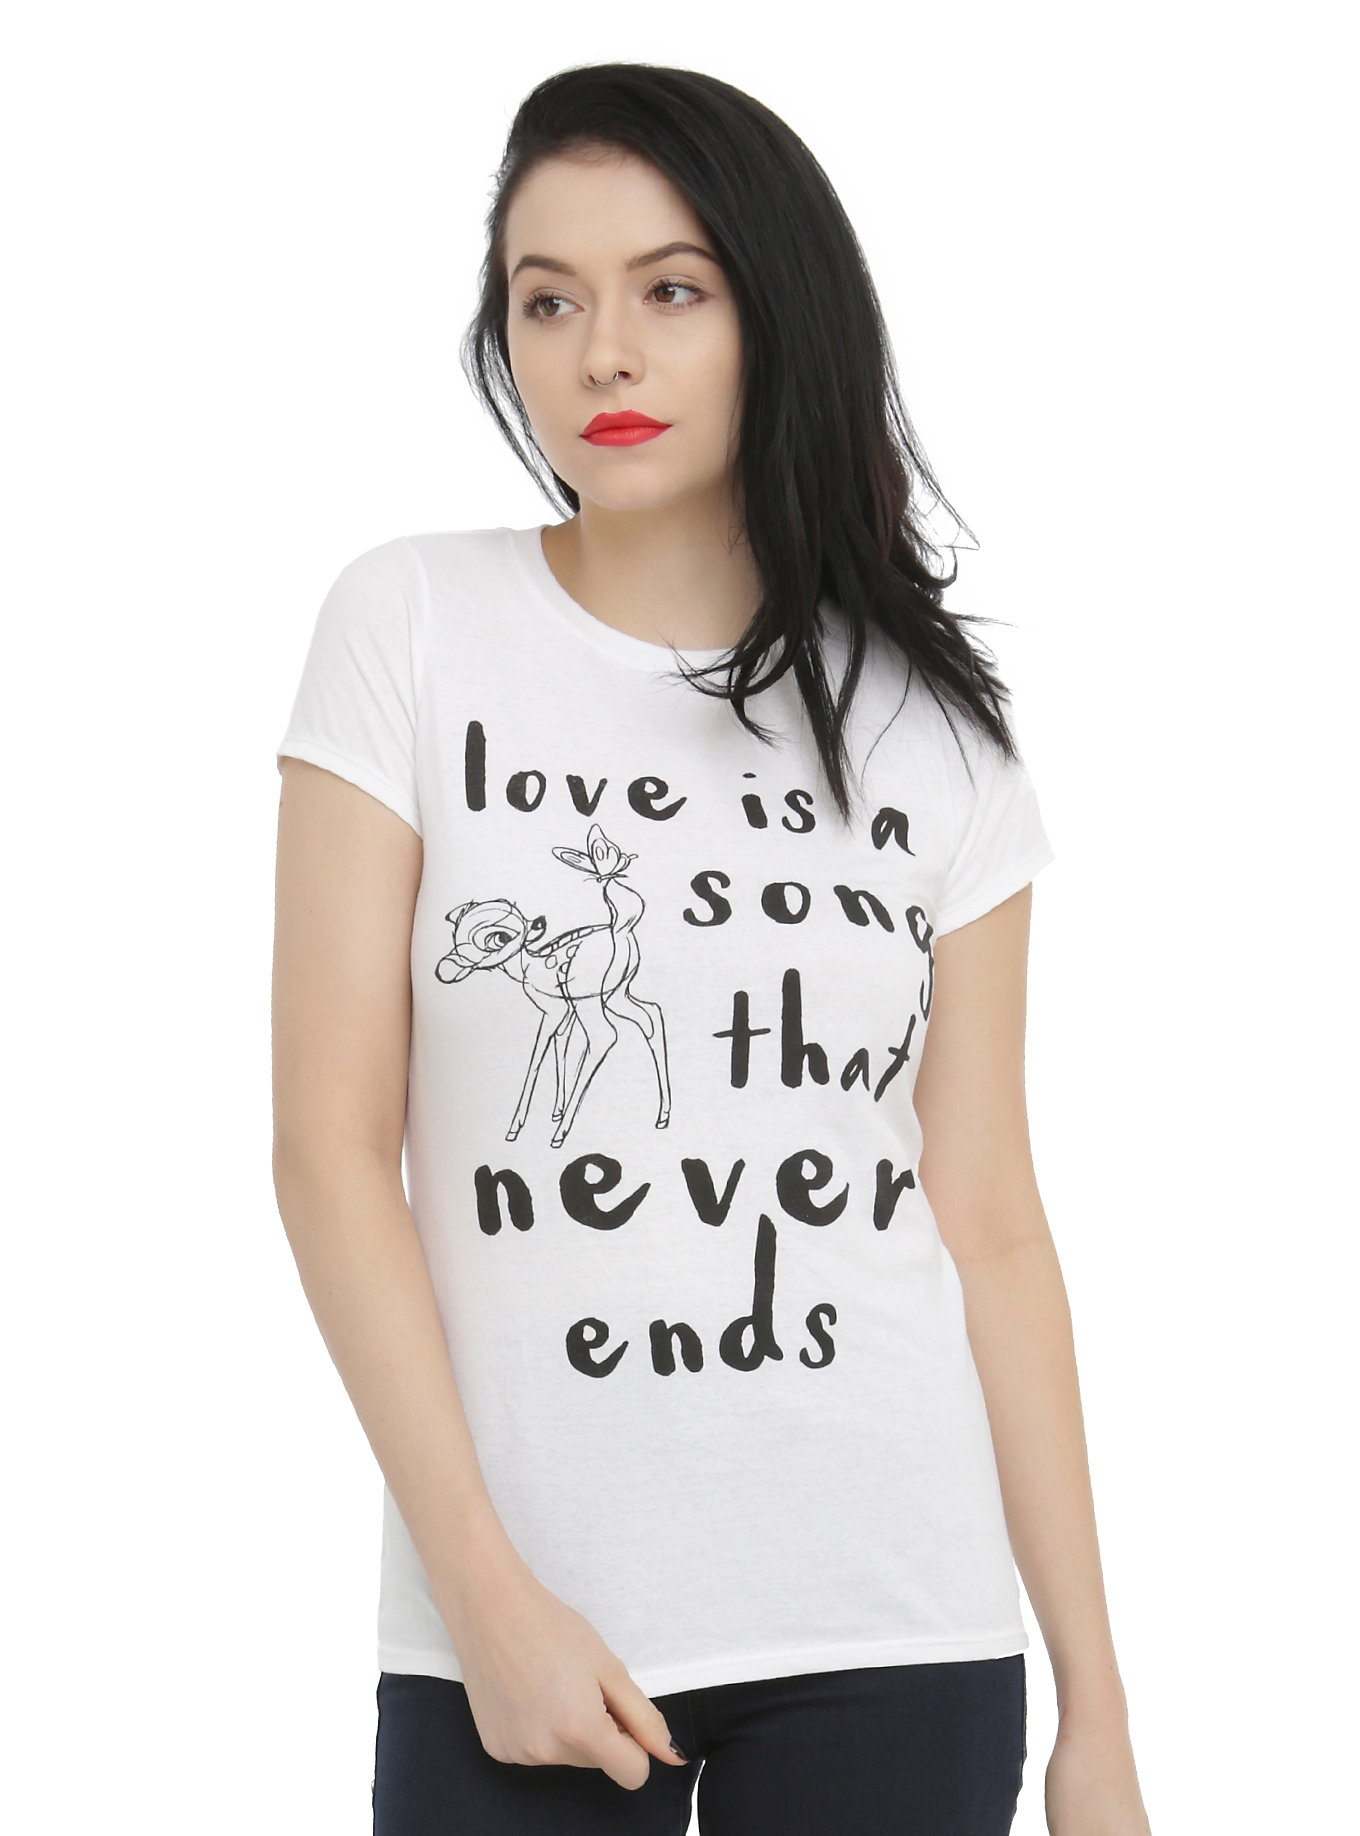 New Disney Clothing & Accessories for Women Online at Hot Topic ...